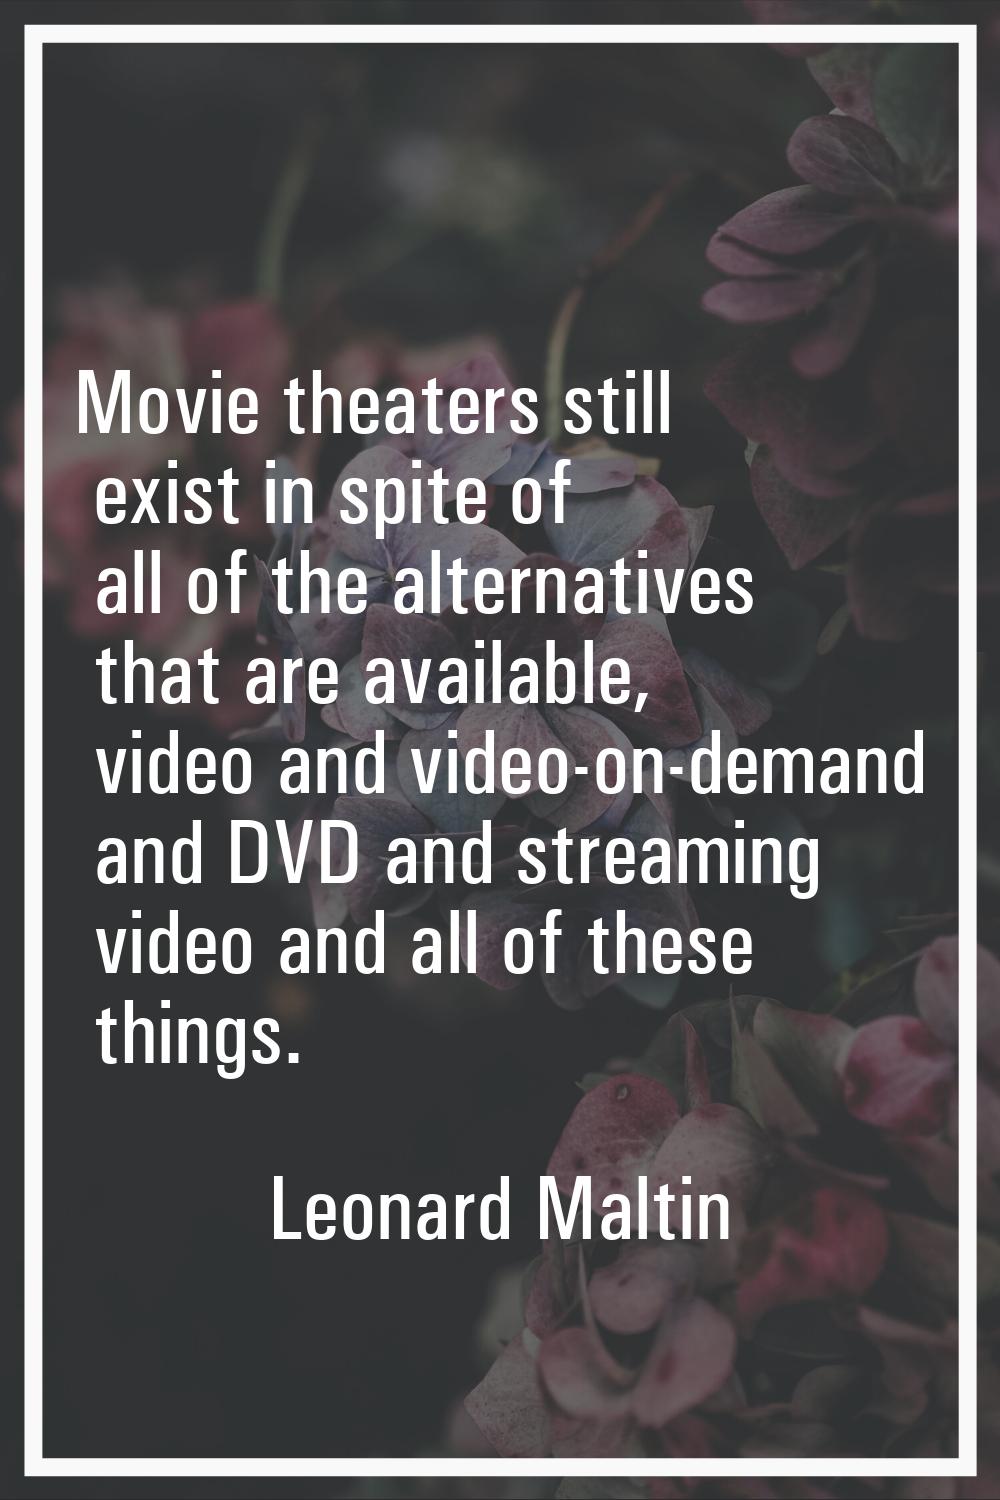 Movie theaters still exist in spite of all of the alternatives that are available, video and video-